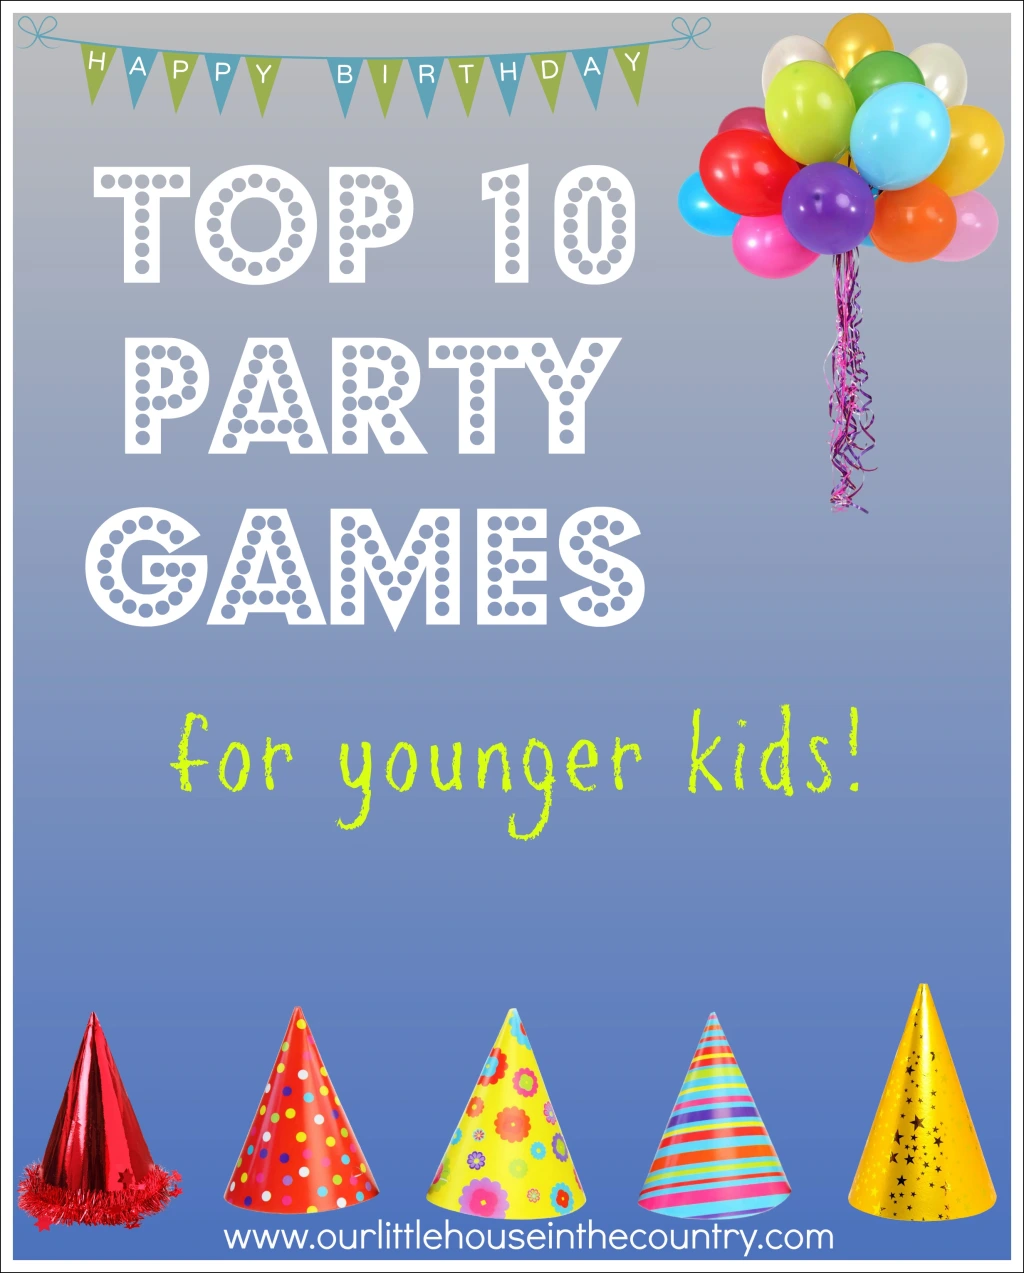 Top 10 Party Games – for younger kids!